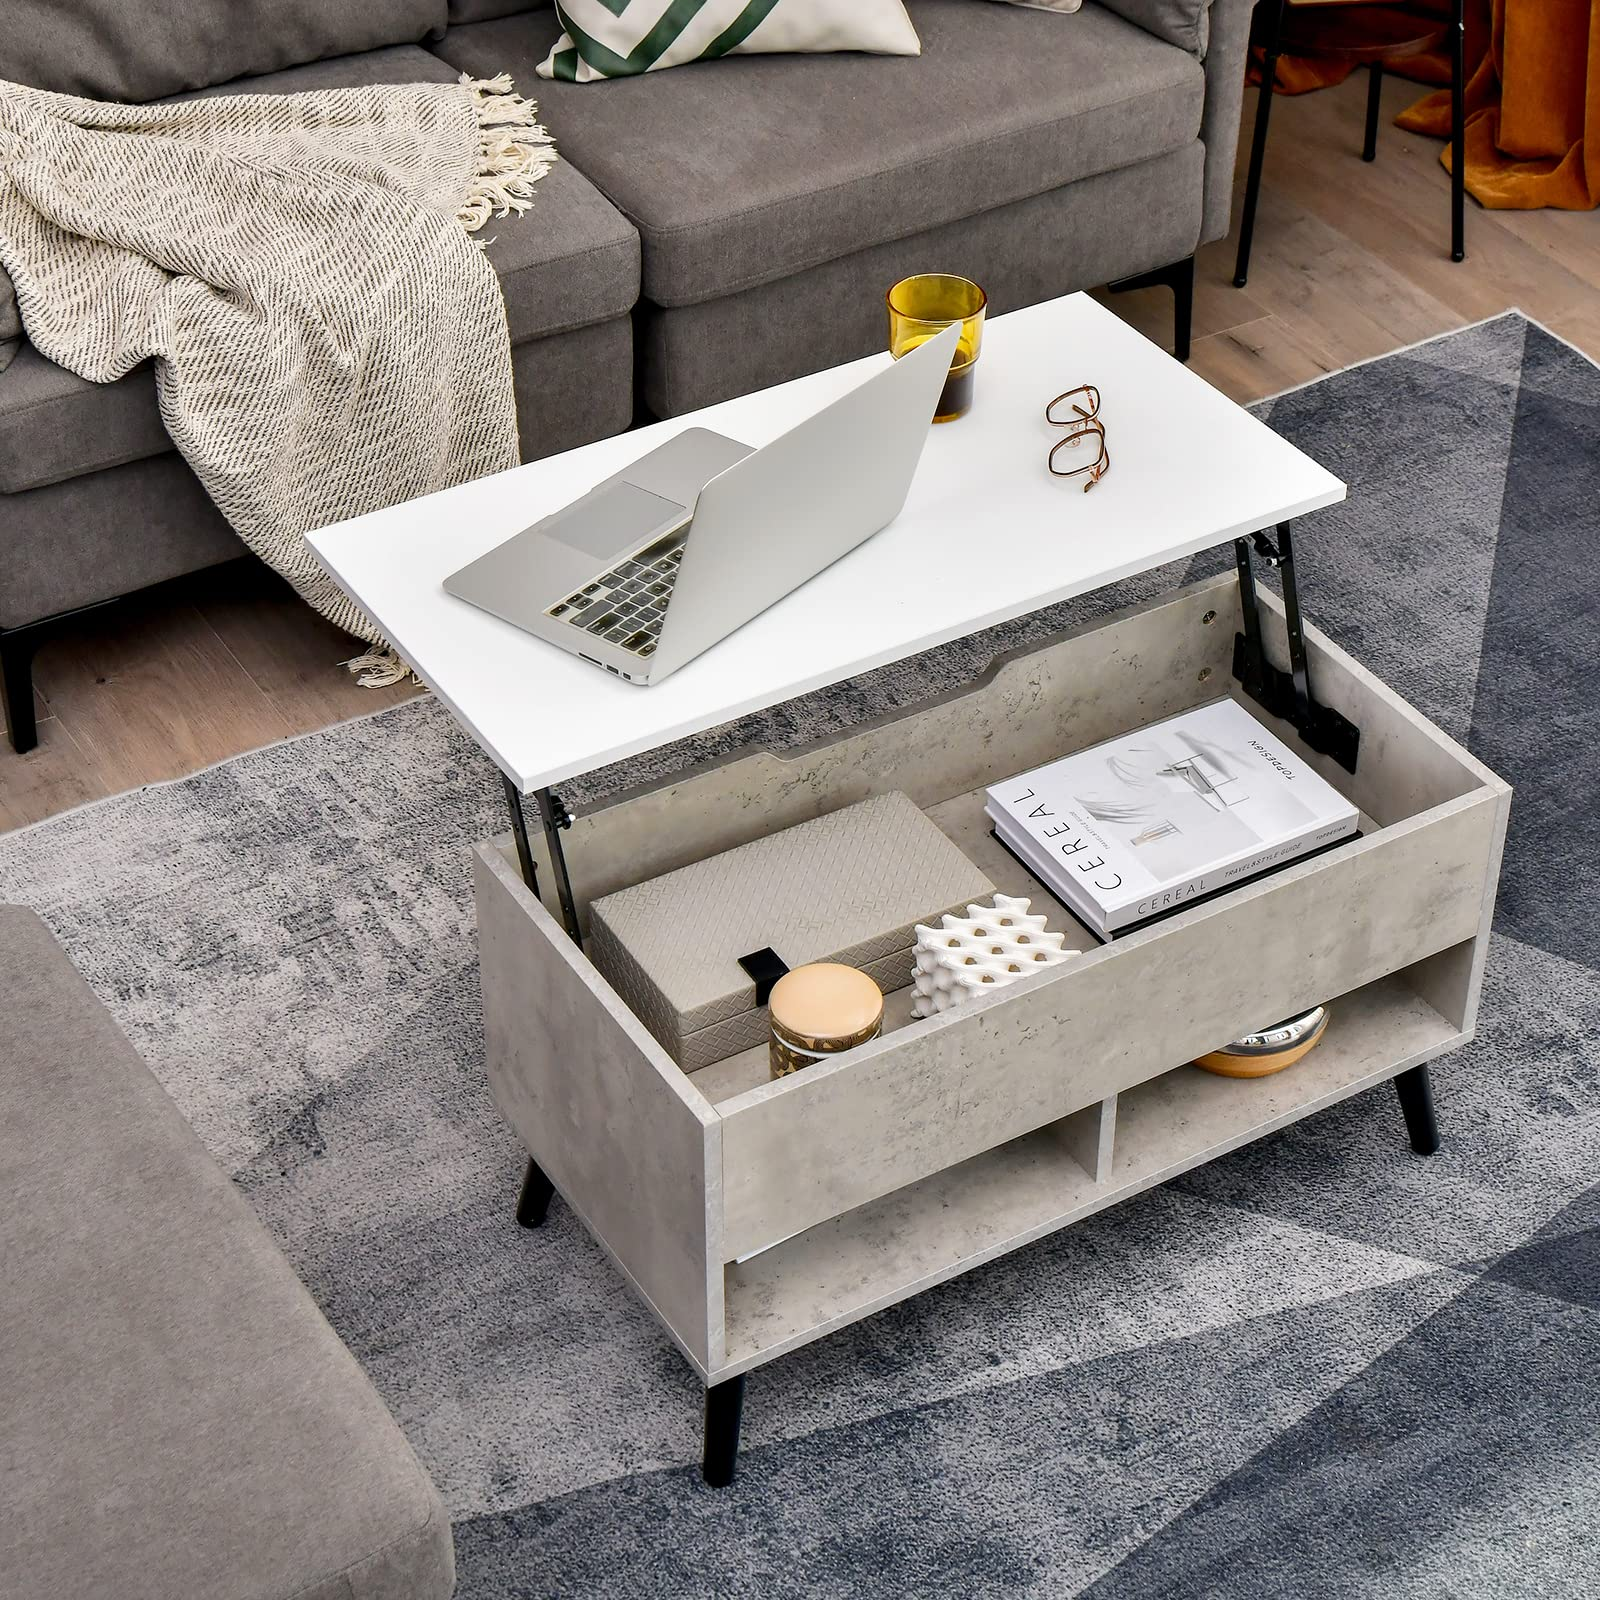 Giantex Lift Top Coffee Table, Modern Cocktail Table w/Hidden Compartment & 2 Open Shelves